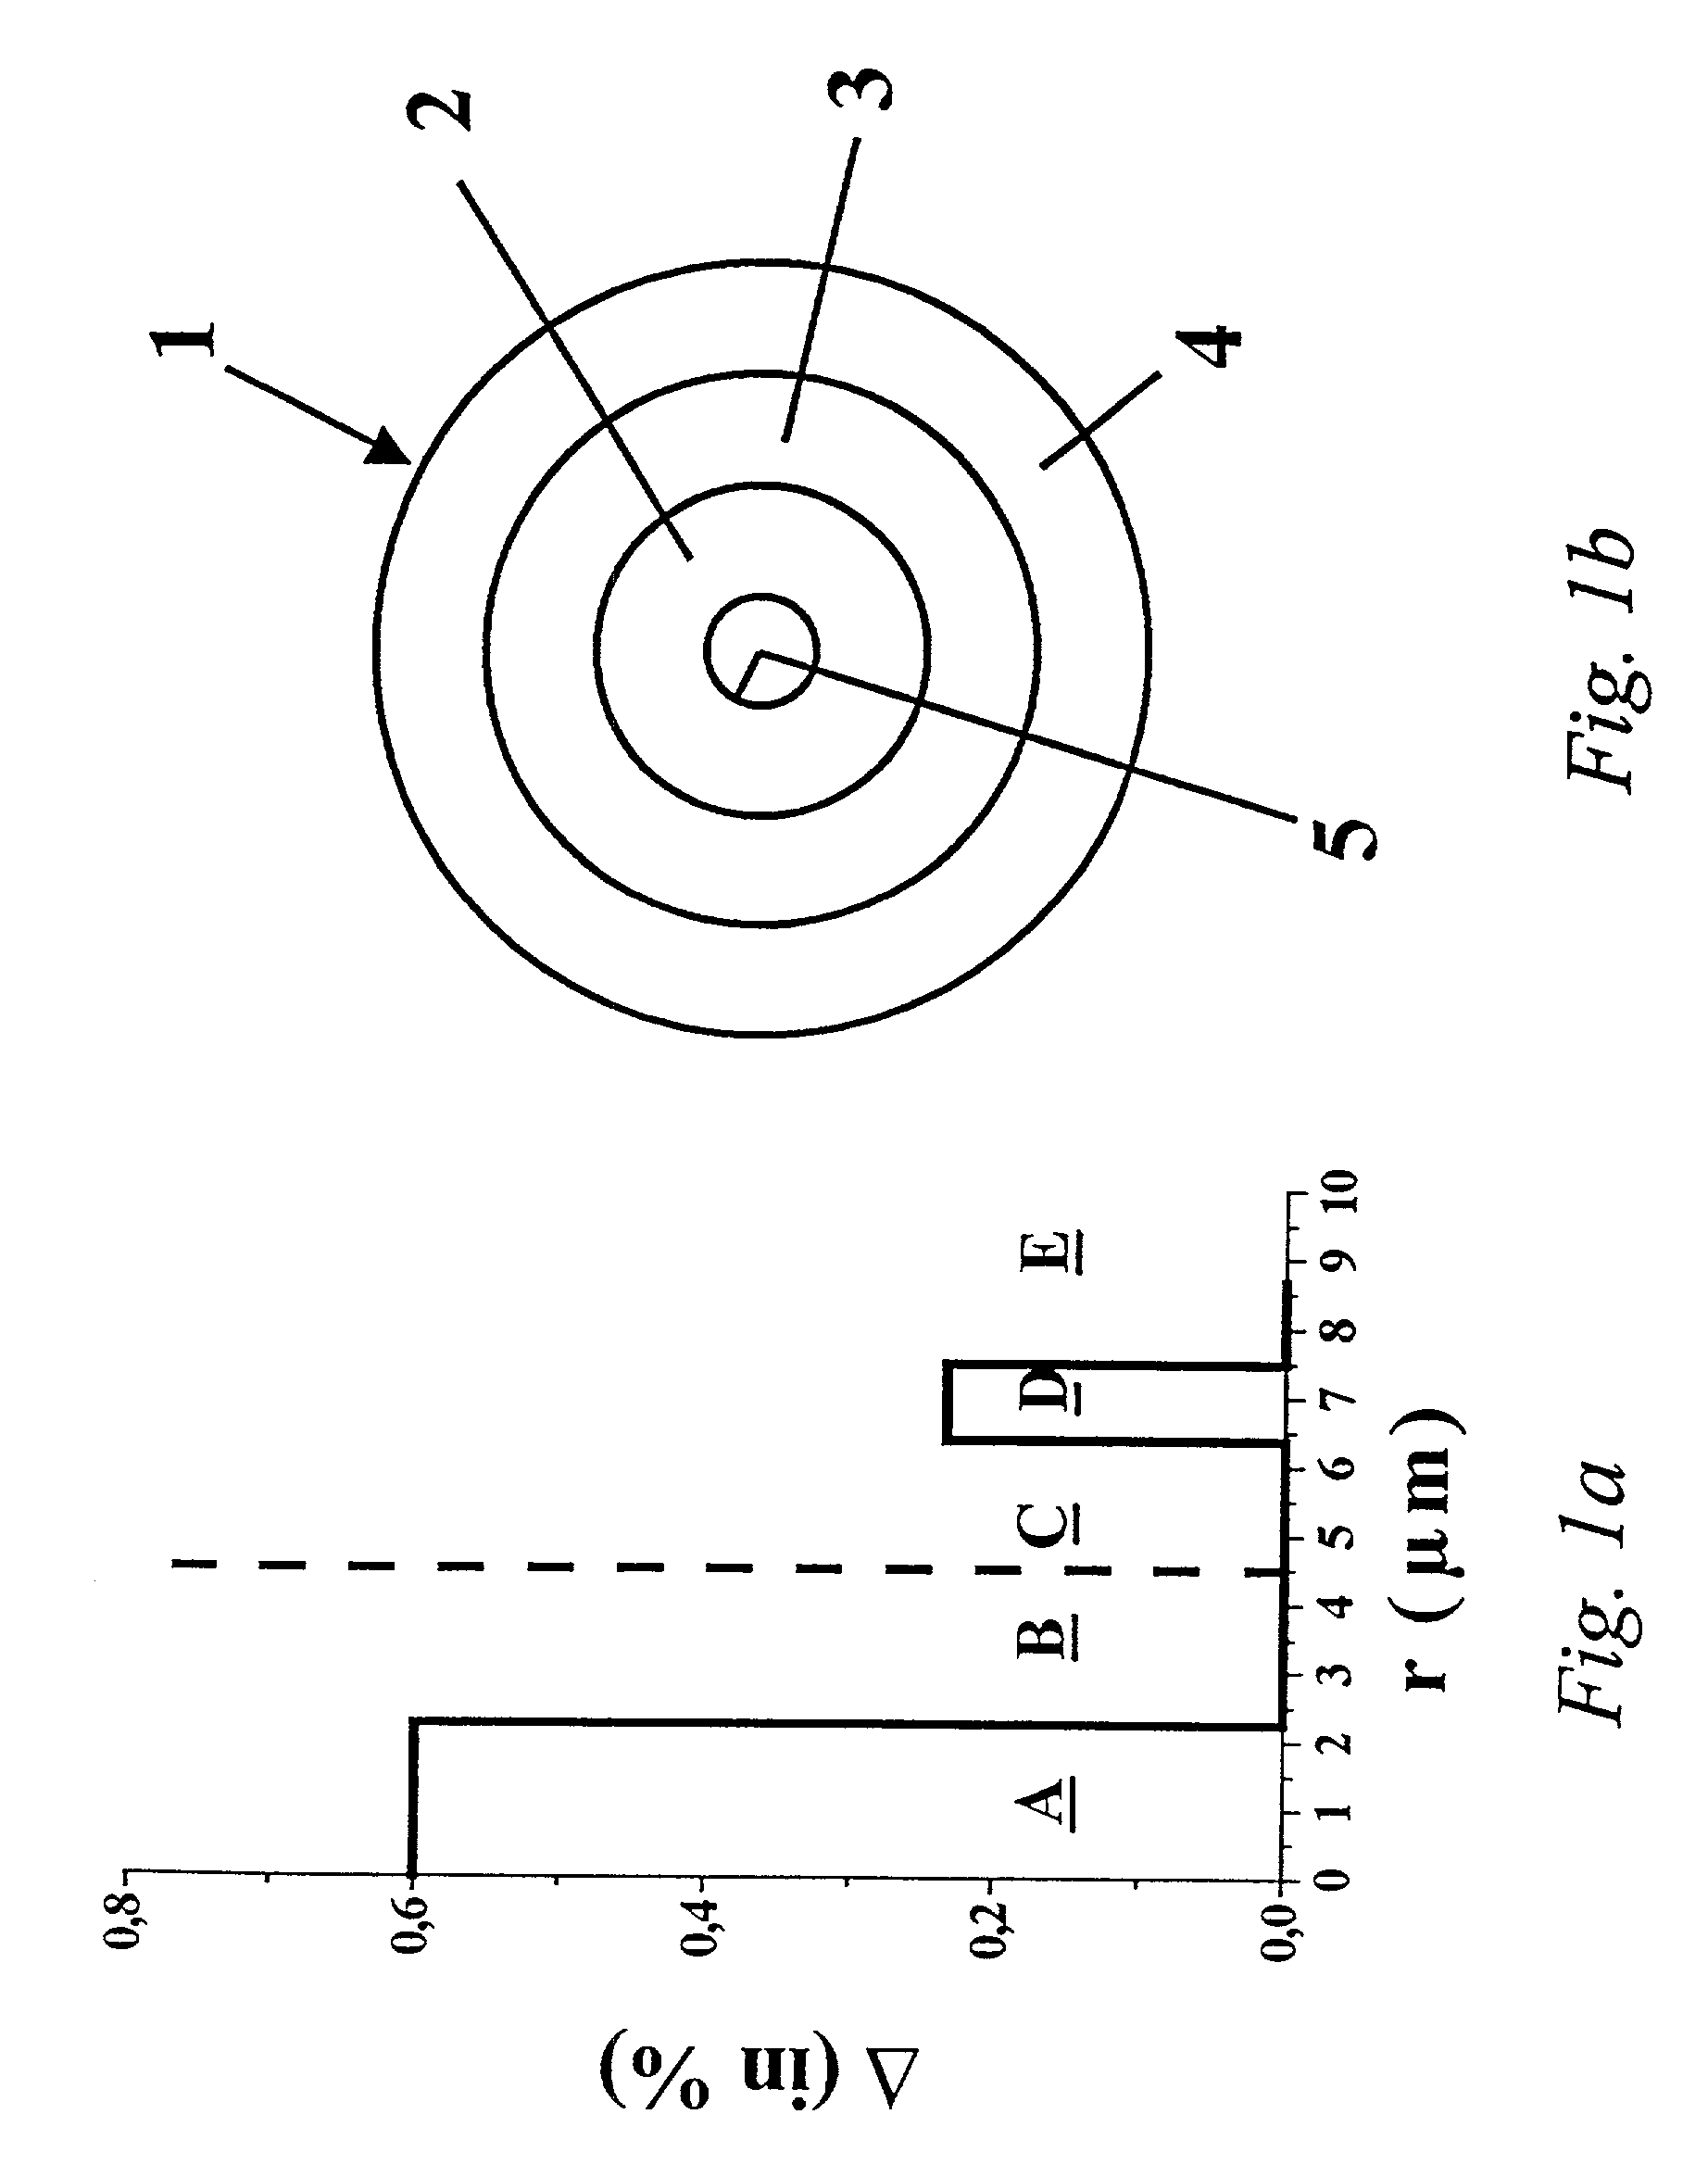 Method of making a jacketed preform for optical fibers using OVD